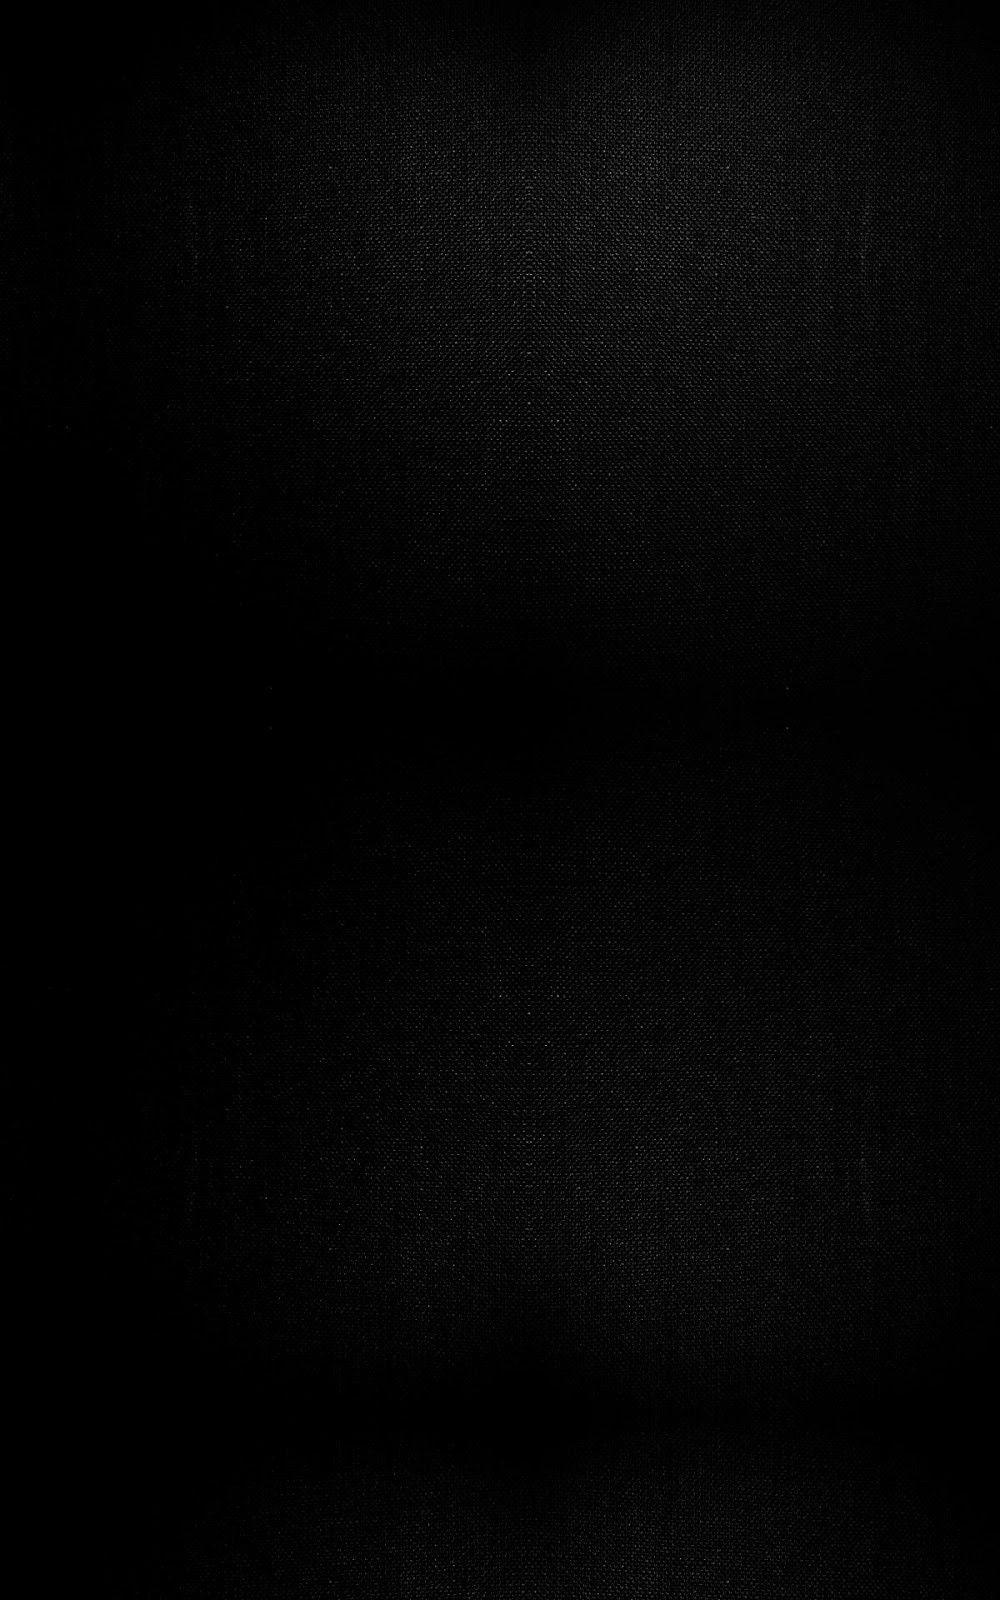 Solid Black iPhone Wallpapers - Top Free Solid Black iPhone Backgrounds